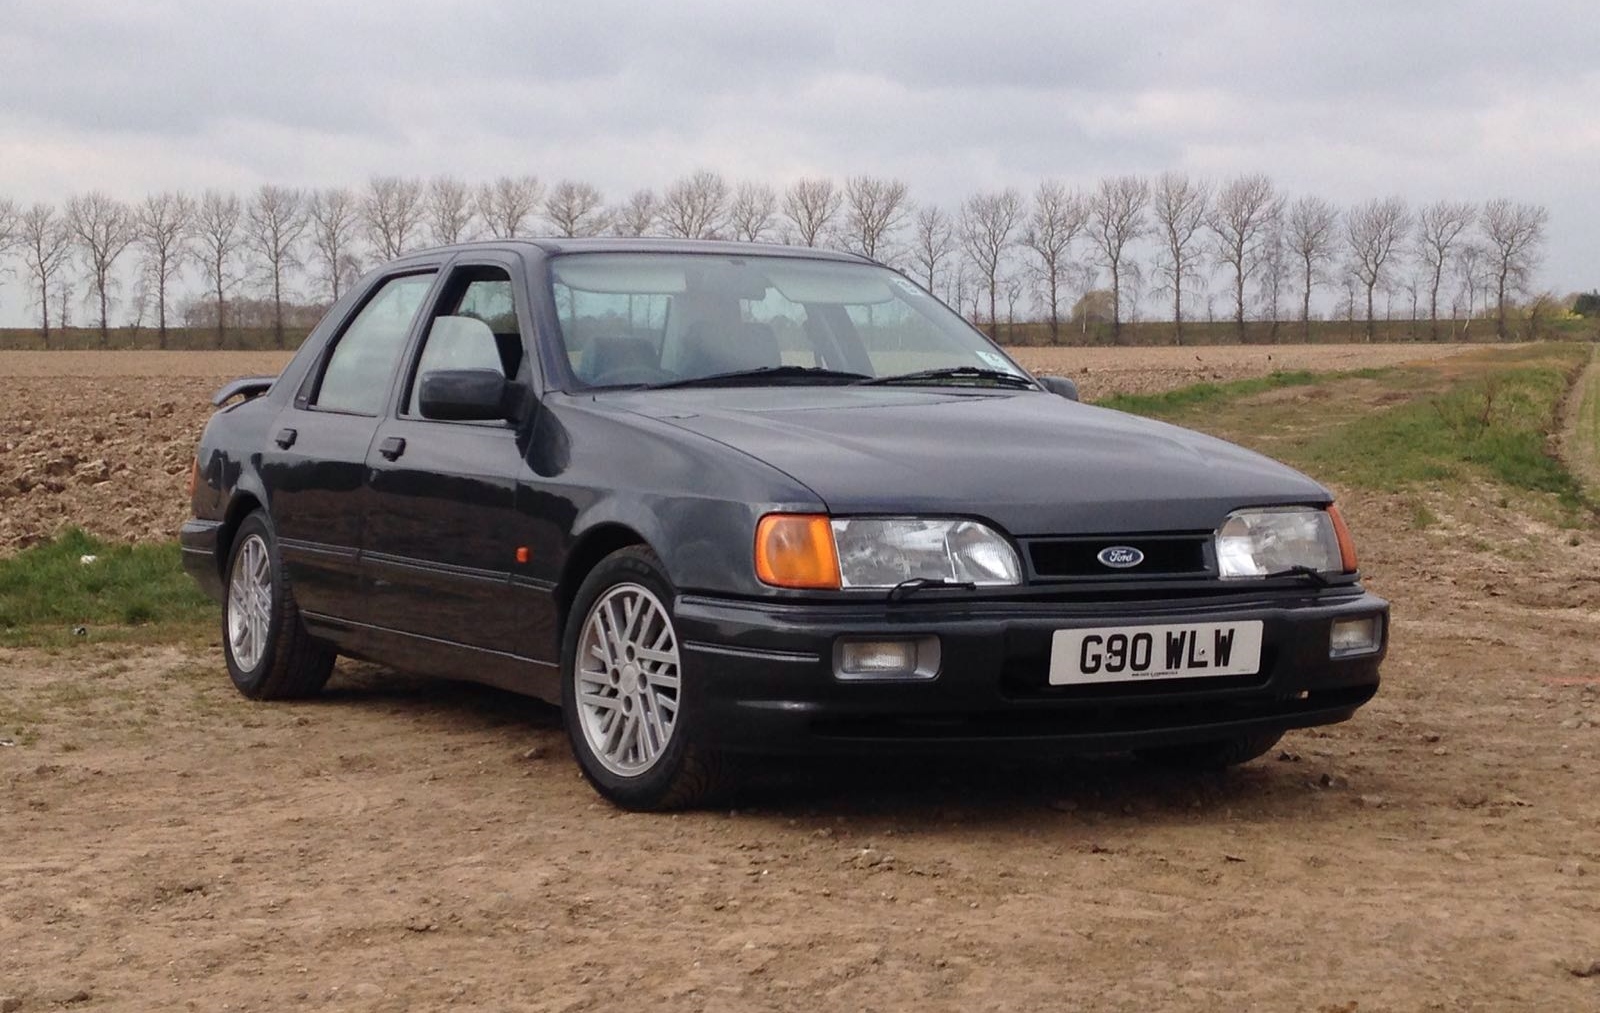 1989 Ford Sierra Sapphire RS Cosworth - ex Top Gear